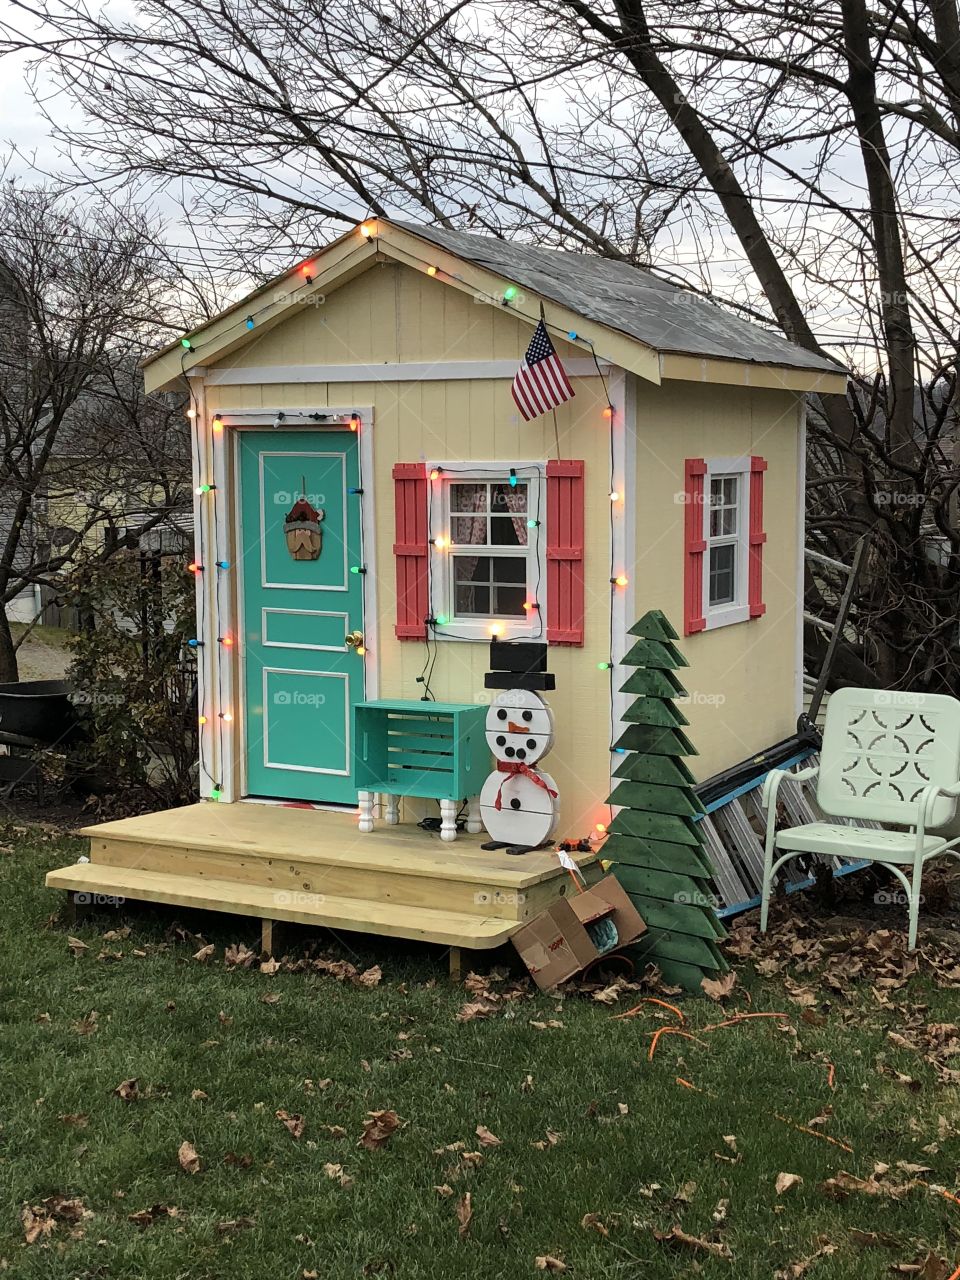 Awesome playhouse